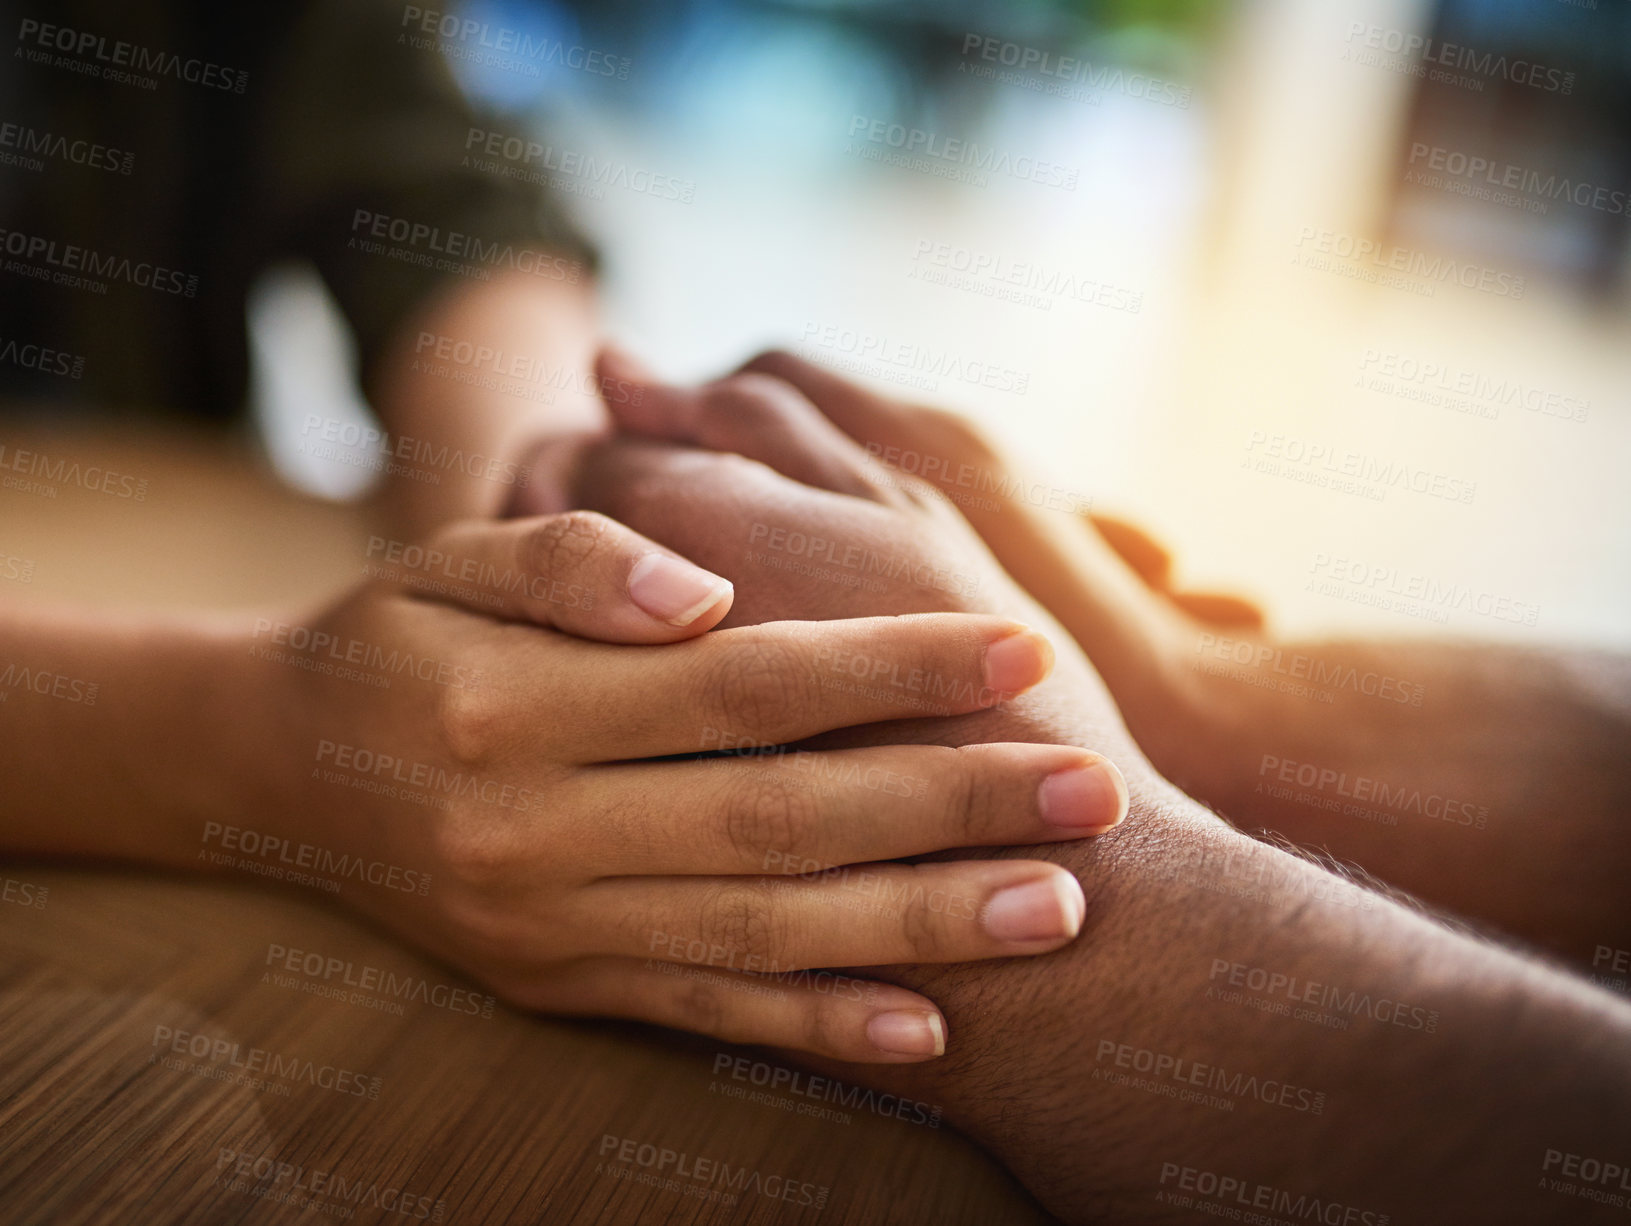 Buy stock photo Holding hands showing care, love and support between friends, couple or family. People comforting, giving affection and consoling with a hand gesture and touch for compassion, empathy and kindness